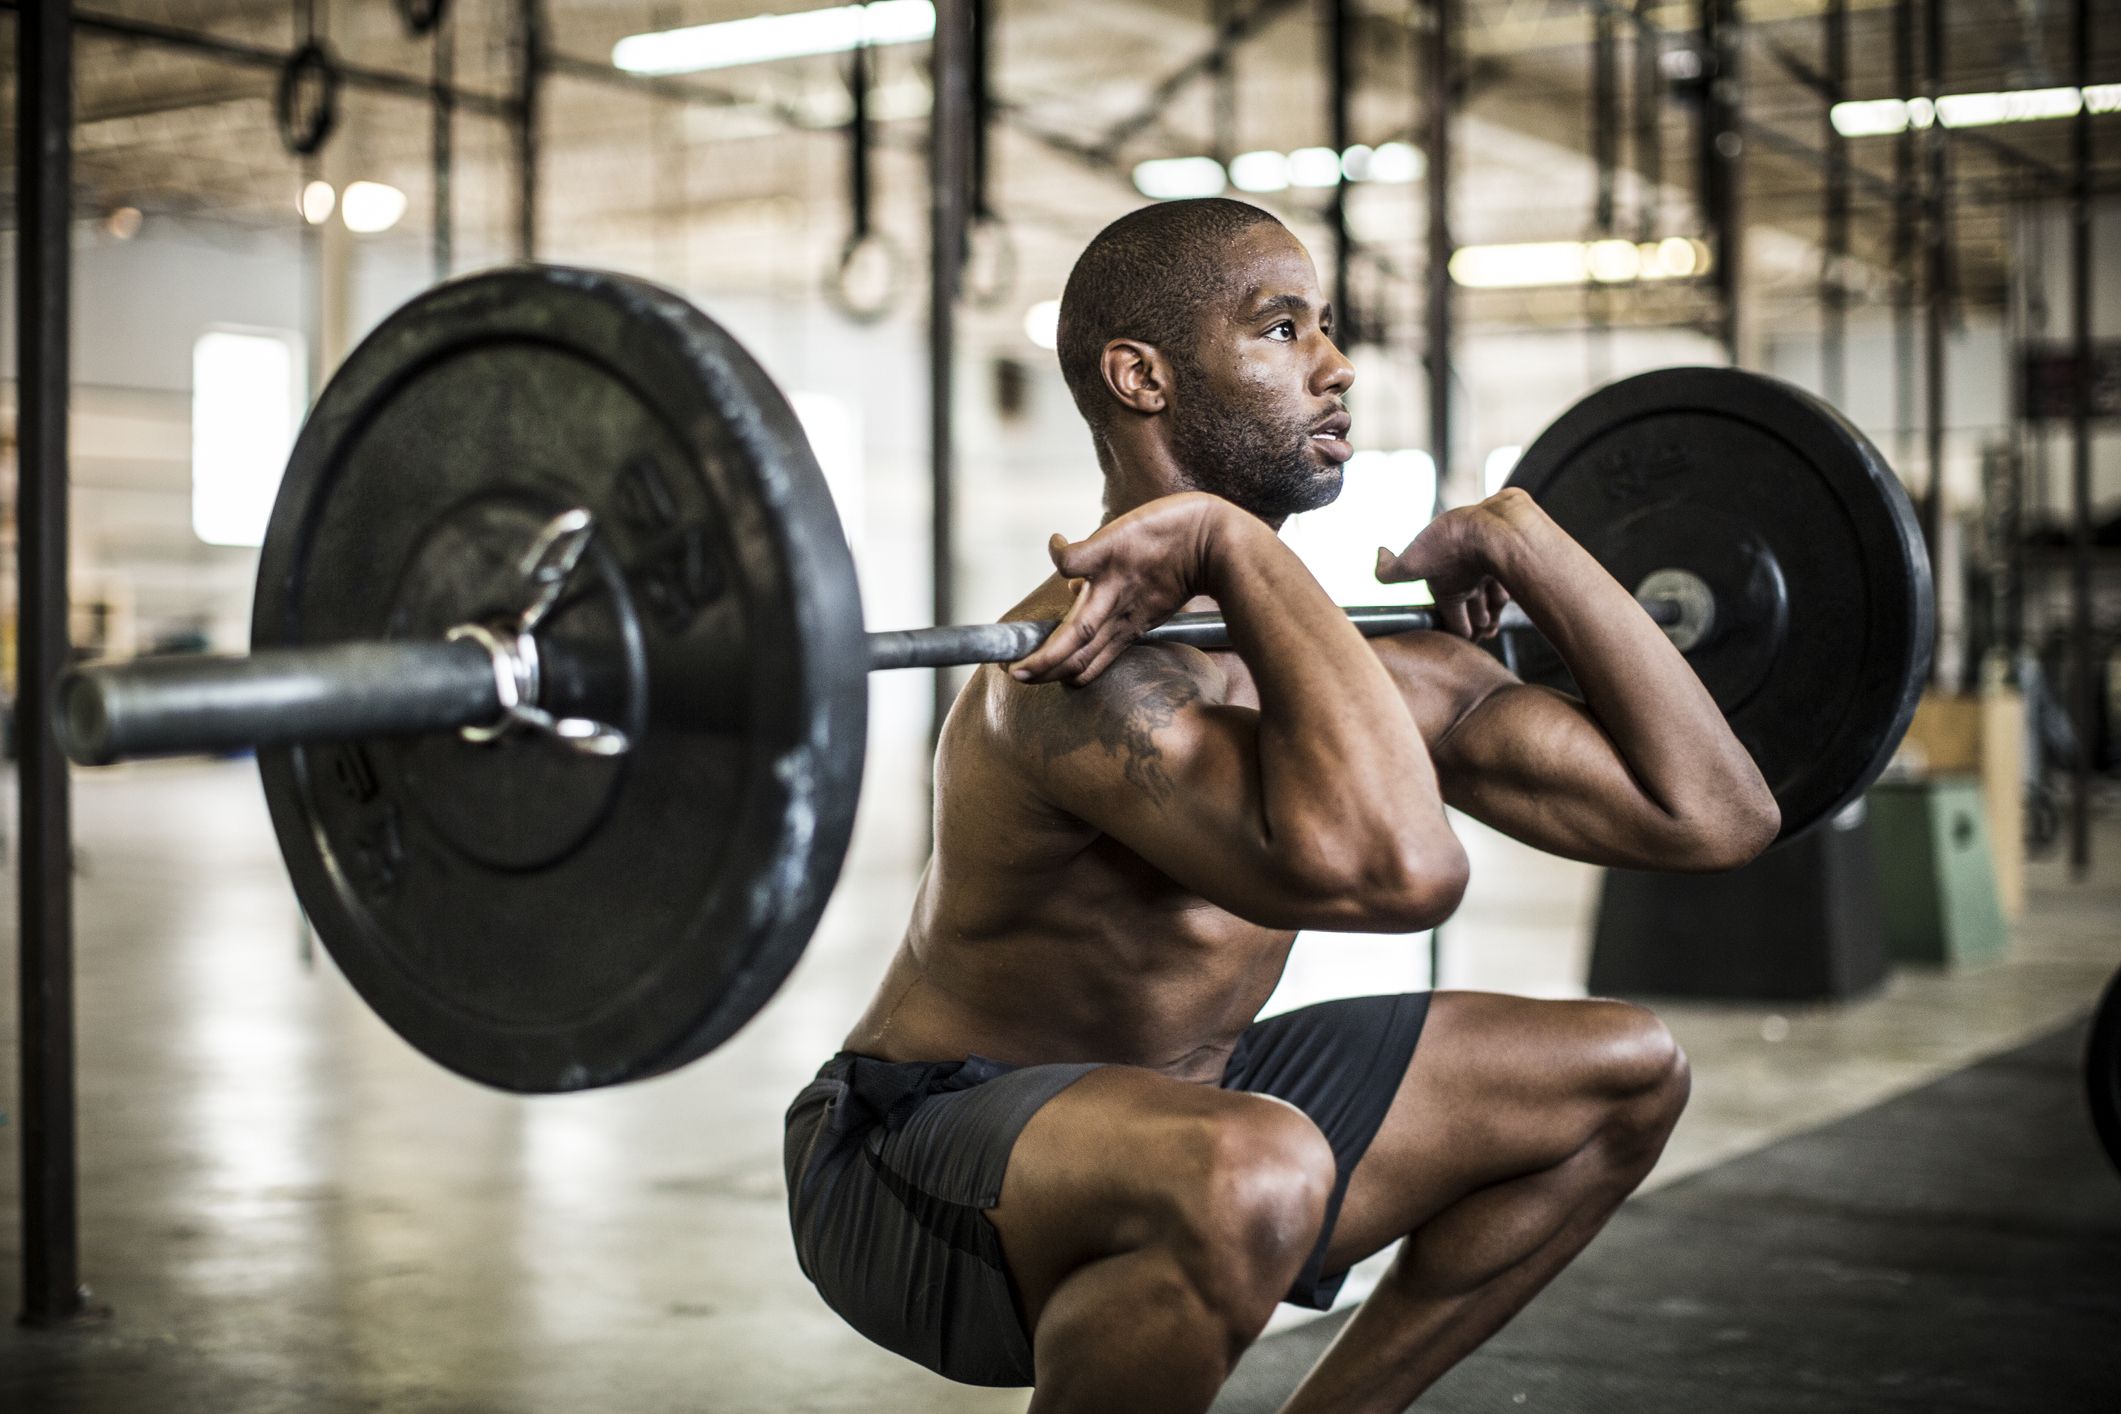 12 Squat Variations for Leg Workouts to Build Strength and Muscle